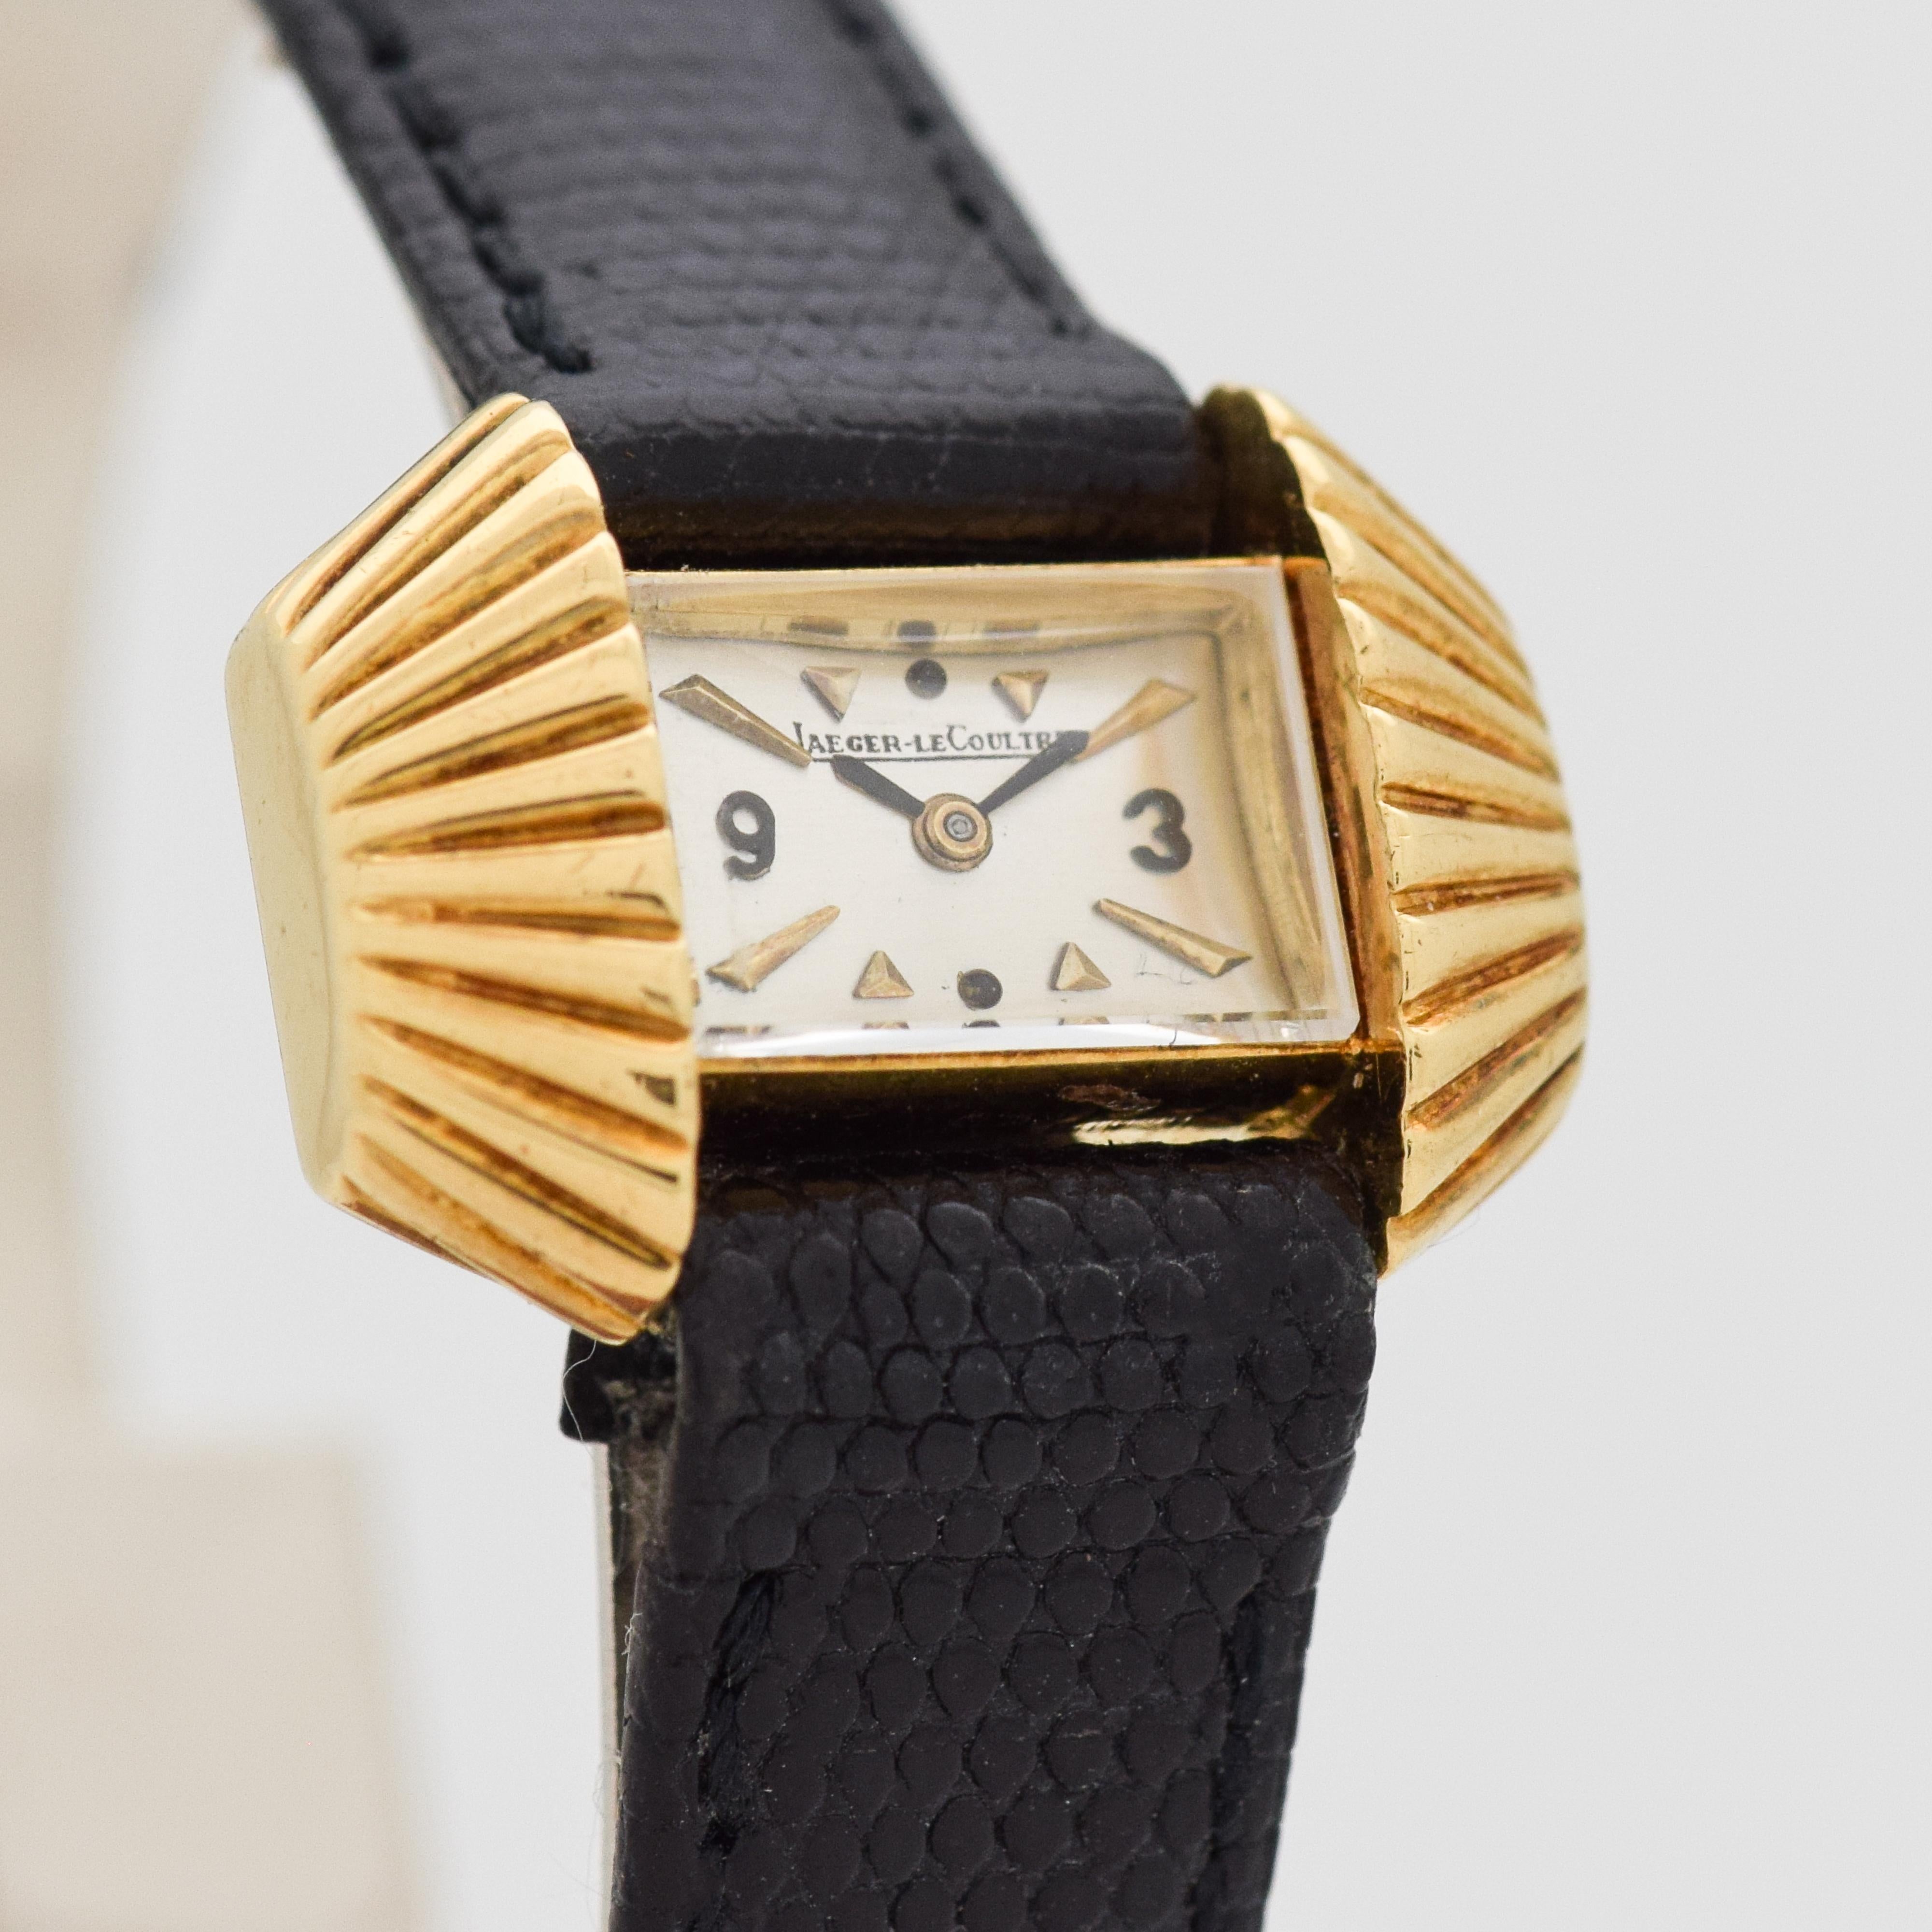 1960's Vintage Jaeger - Le Coultre Ladies 18k Yellow Gold Back Wind watch with Unique Ridged Sides with Silver Dial with Applied 3 and 9 with Beveled Arrow Markers. 23mm x 16mm lug to lug (0.91 in. x 0.63 in.) - 15 jewel, manual caliber movement.